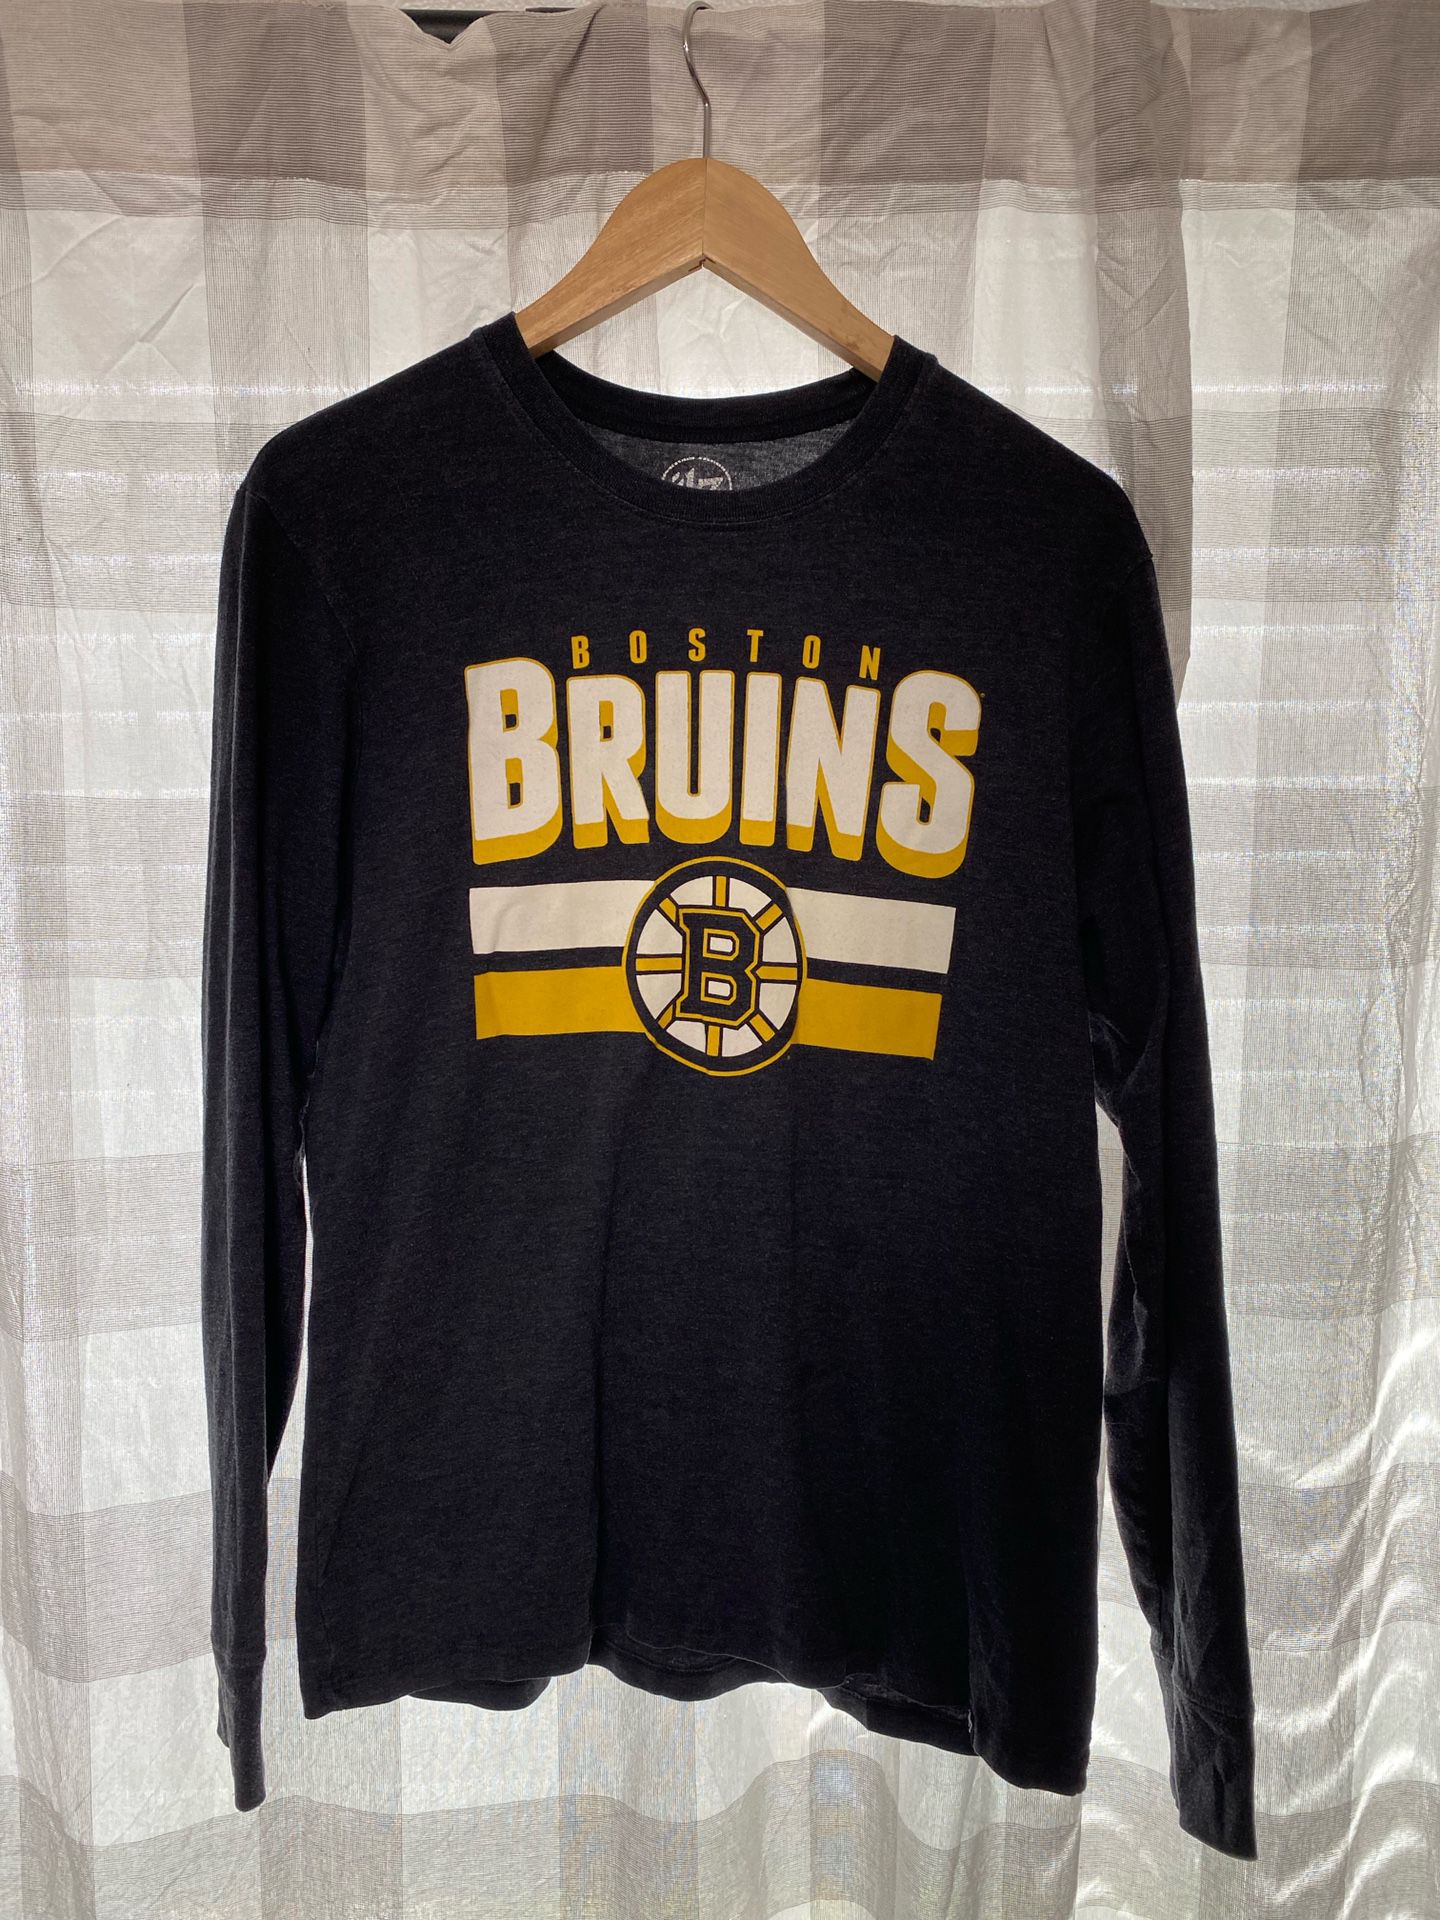 NHL Boston Bruins Shirt Adult Size Large Gray Yellow Long Sleeve NHL Hockey  Men for Sale in San Antonio, TX - OfferUp